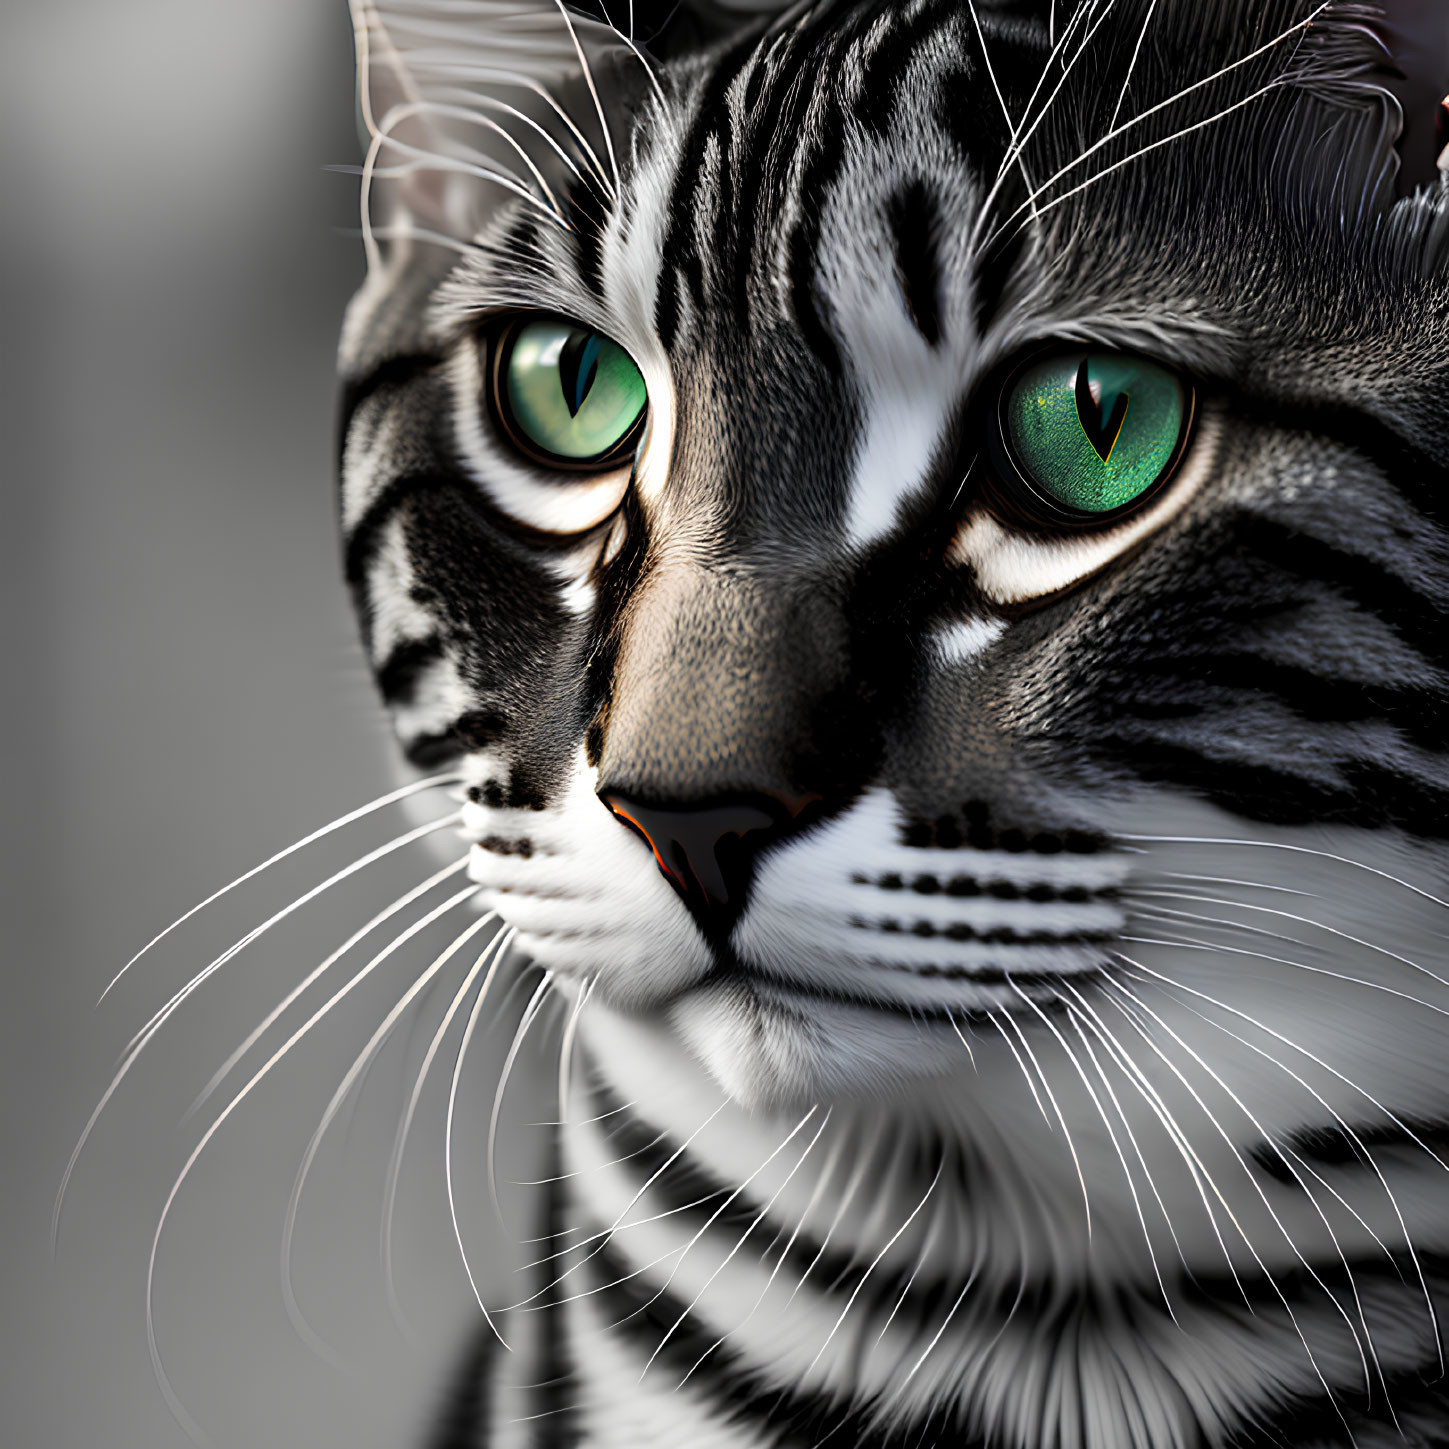 Detailed Close-Up of Cat with Green Eyes and Striped Fur